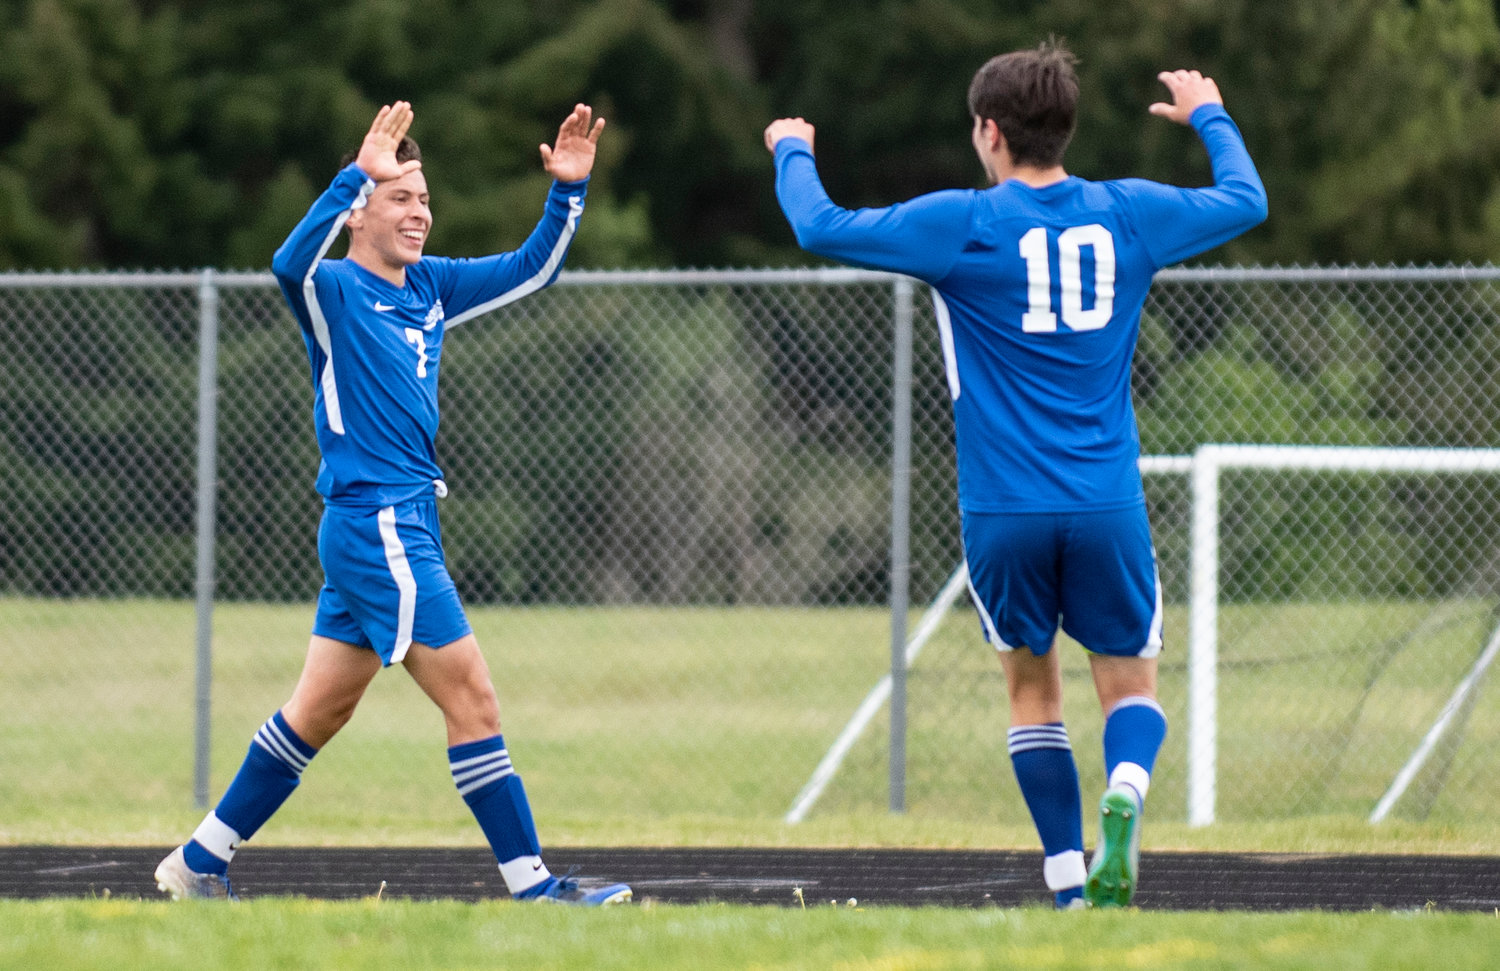 Rochester's Alexis Castillo-Corona (7) high-fives Erik Vasquez-Valentine after scoring a goal to put the Warriors up 2-0 in the first half against Centralia in the opening round of the 2A EvCo playoffs Saturday at home.